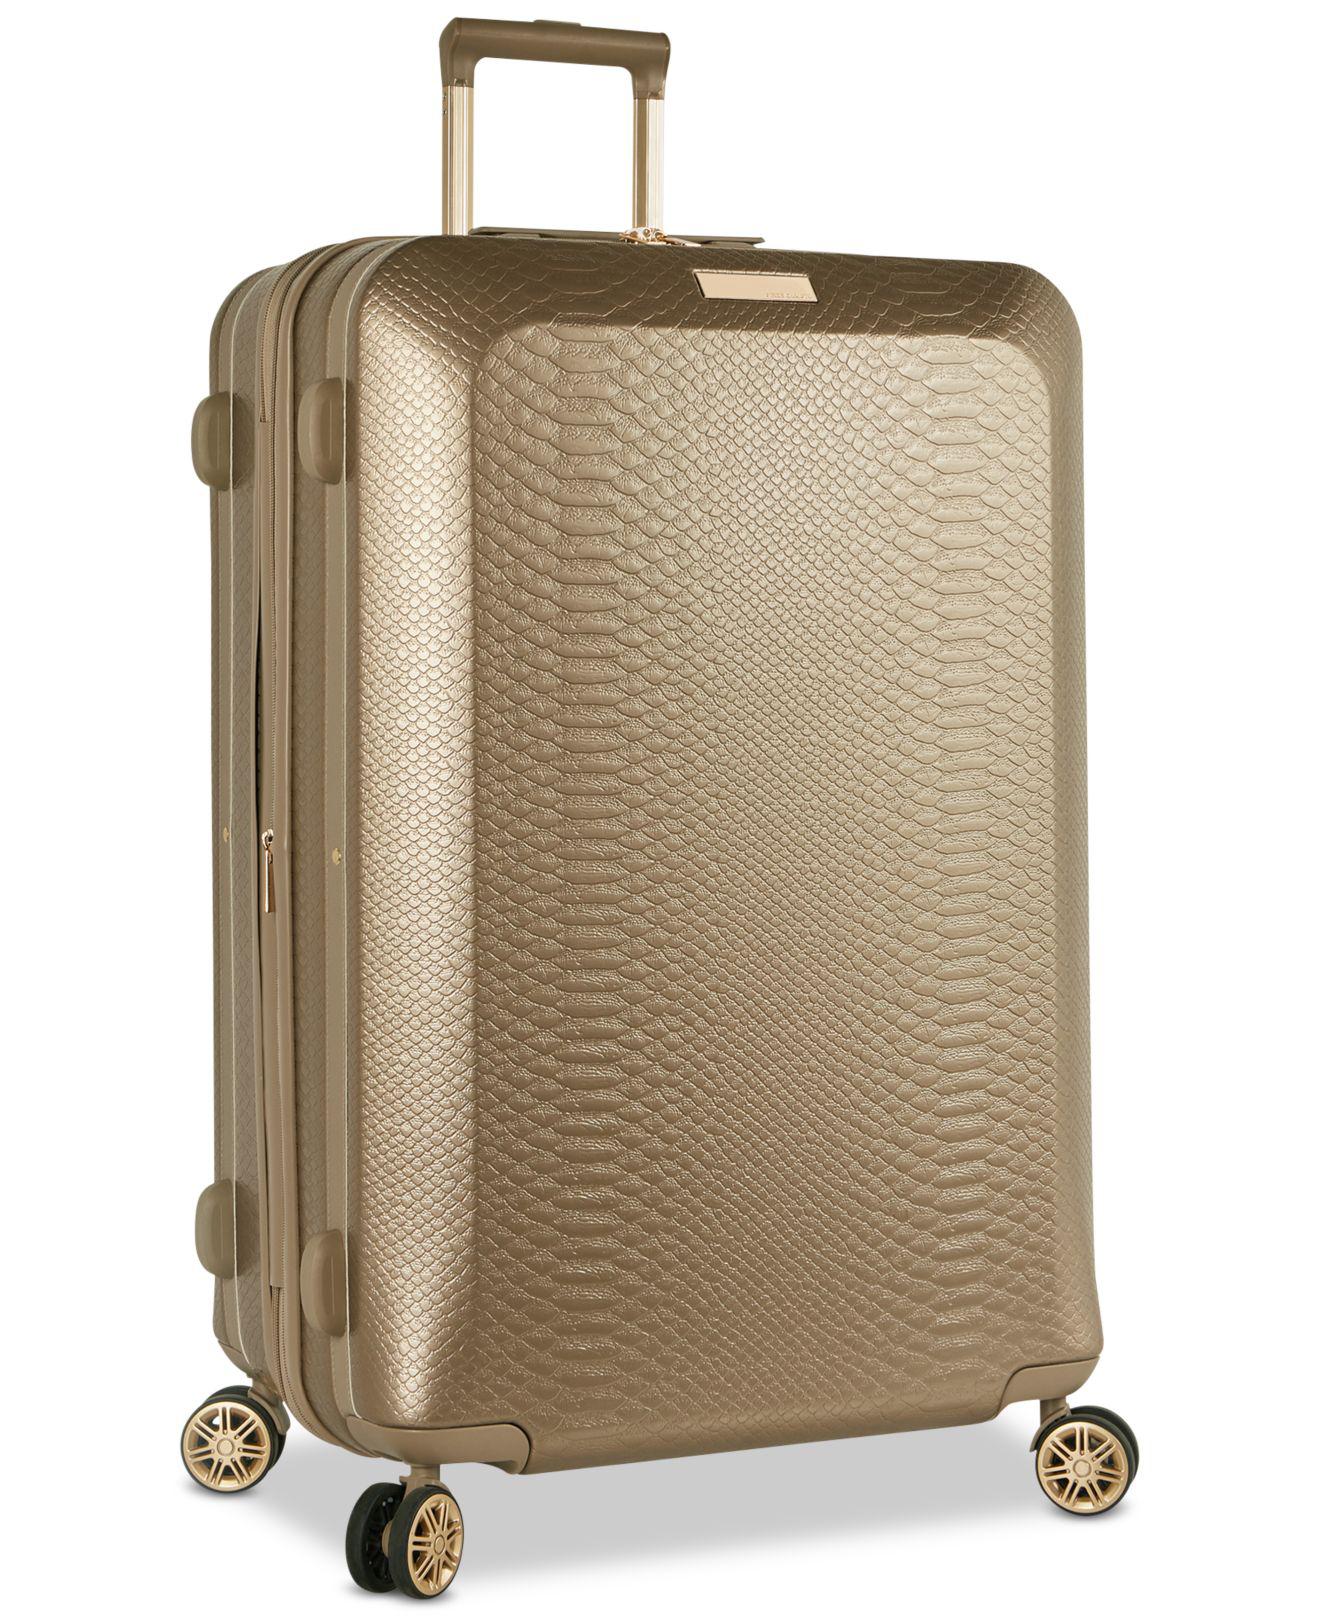 Vince Camuto 3-Piece Expandable Spinner Suitcase Set - Tan - Yahoo